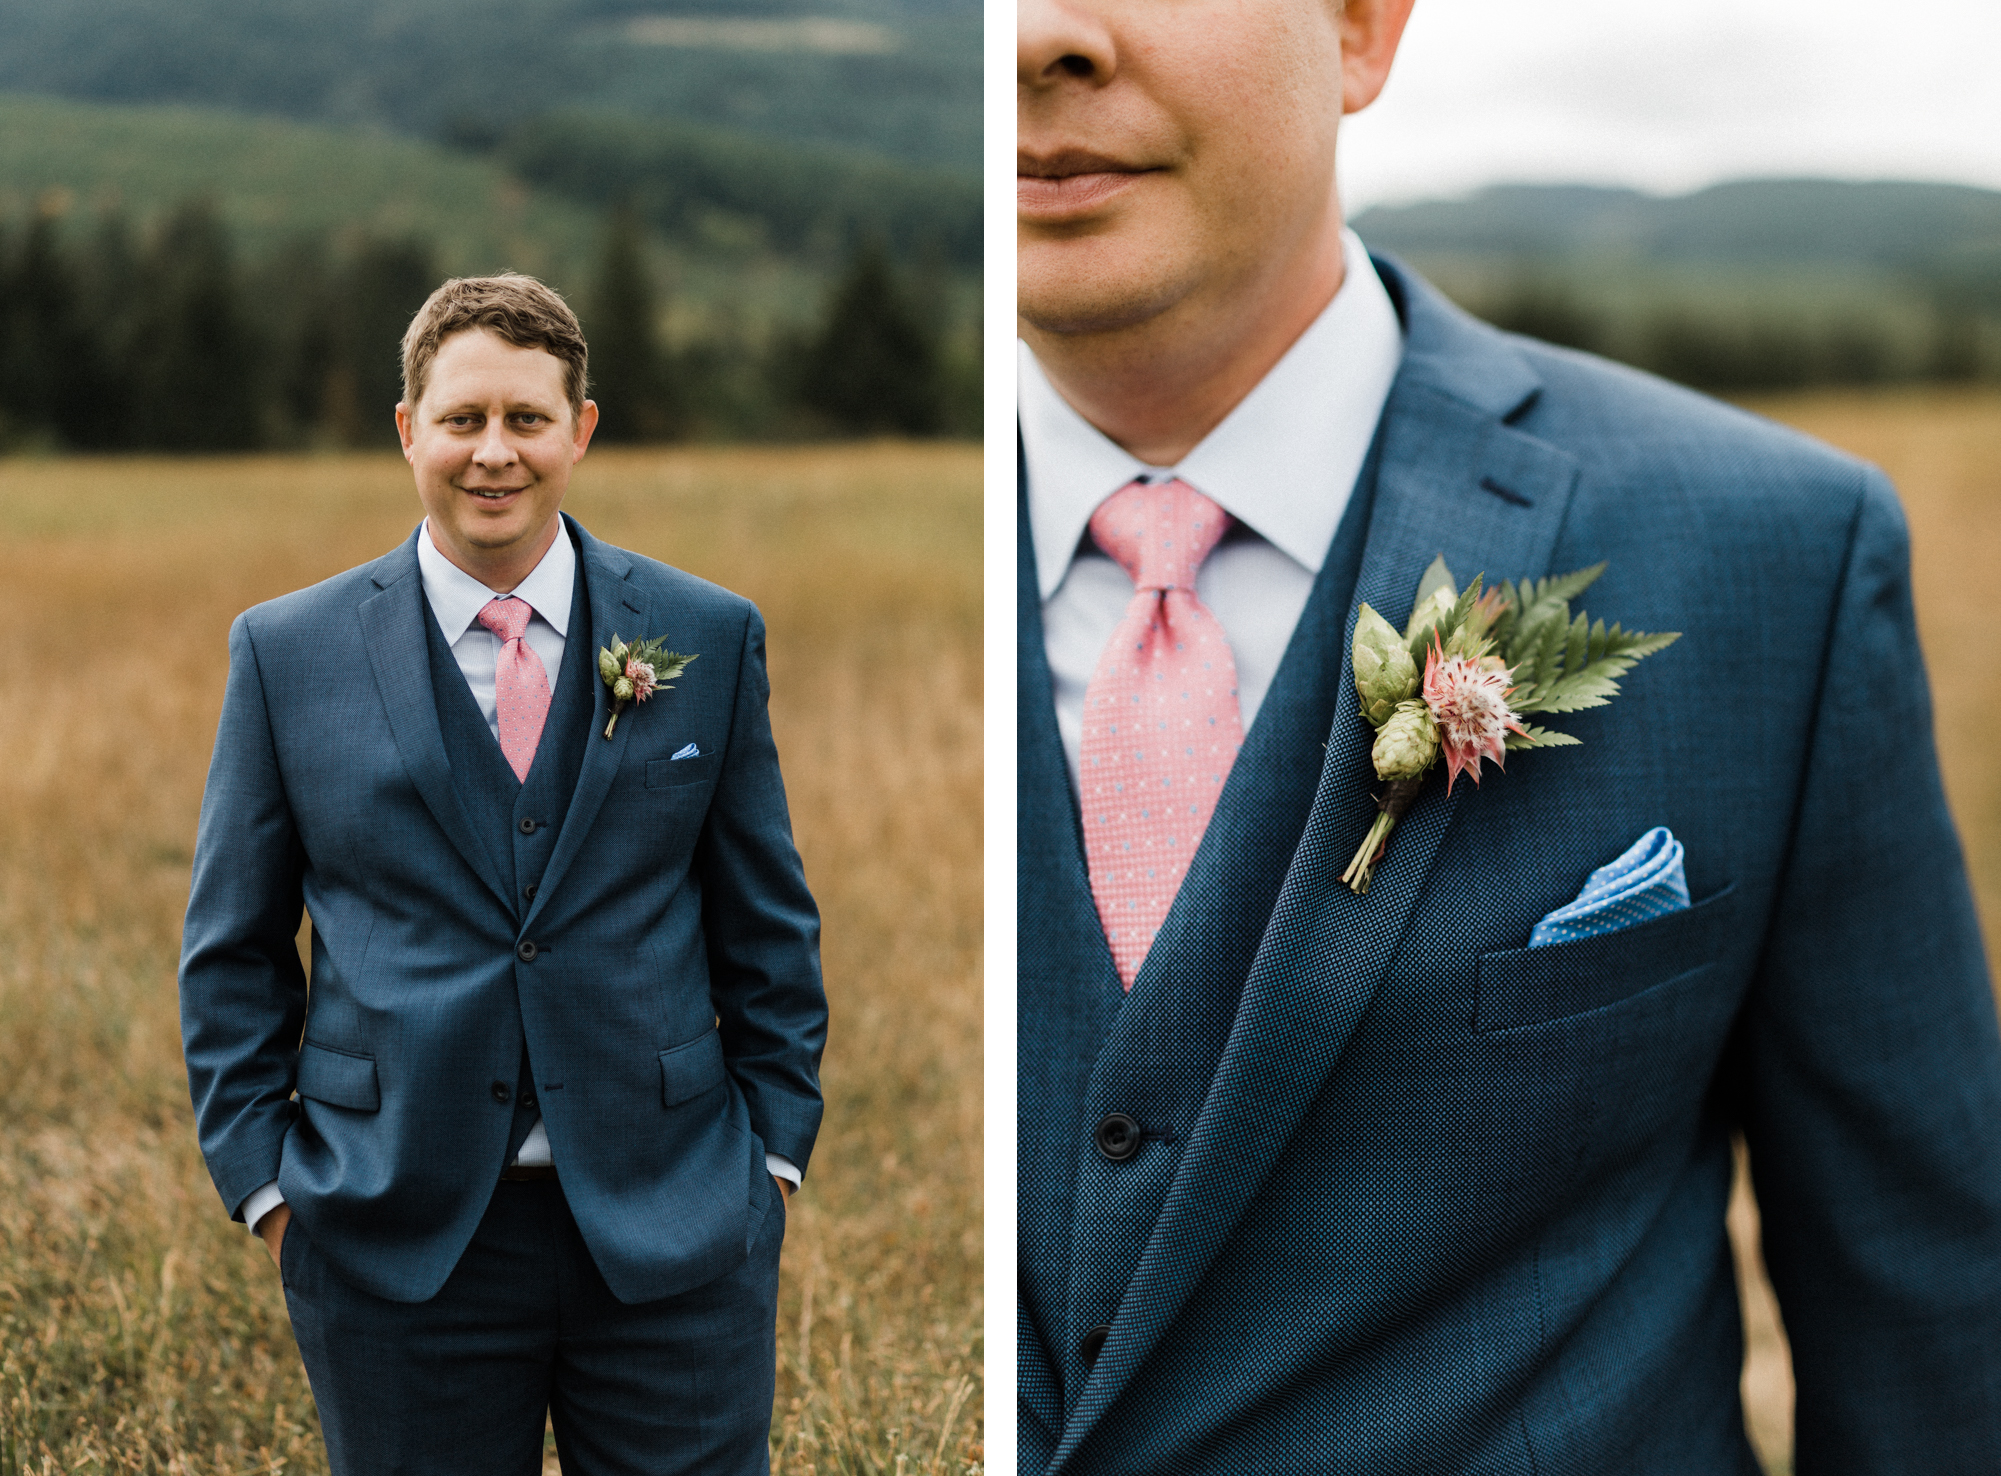 Photo on left show the groom posing for a portrait. Photo on right is a close up on his boutonniere.